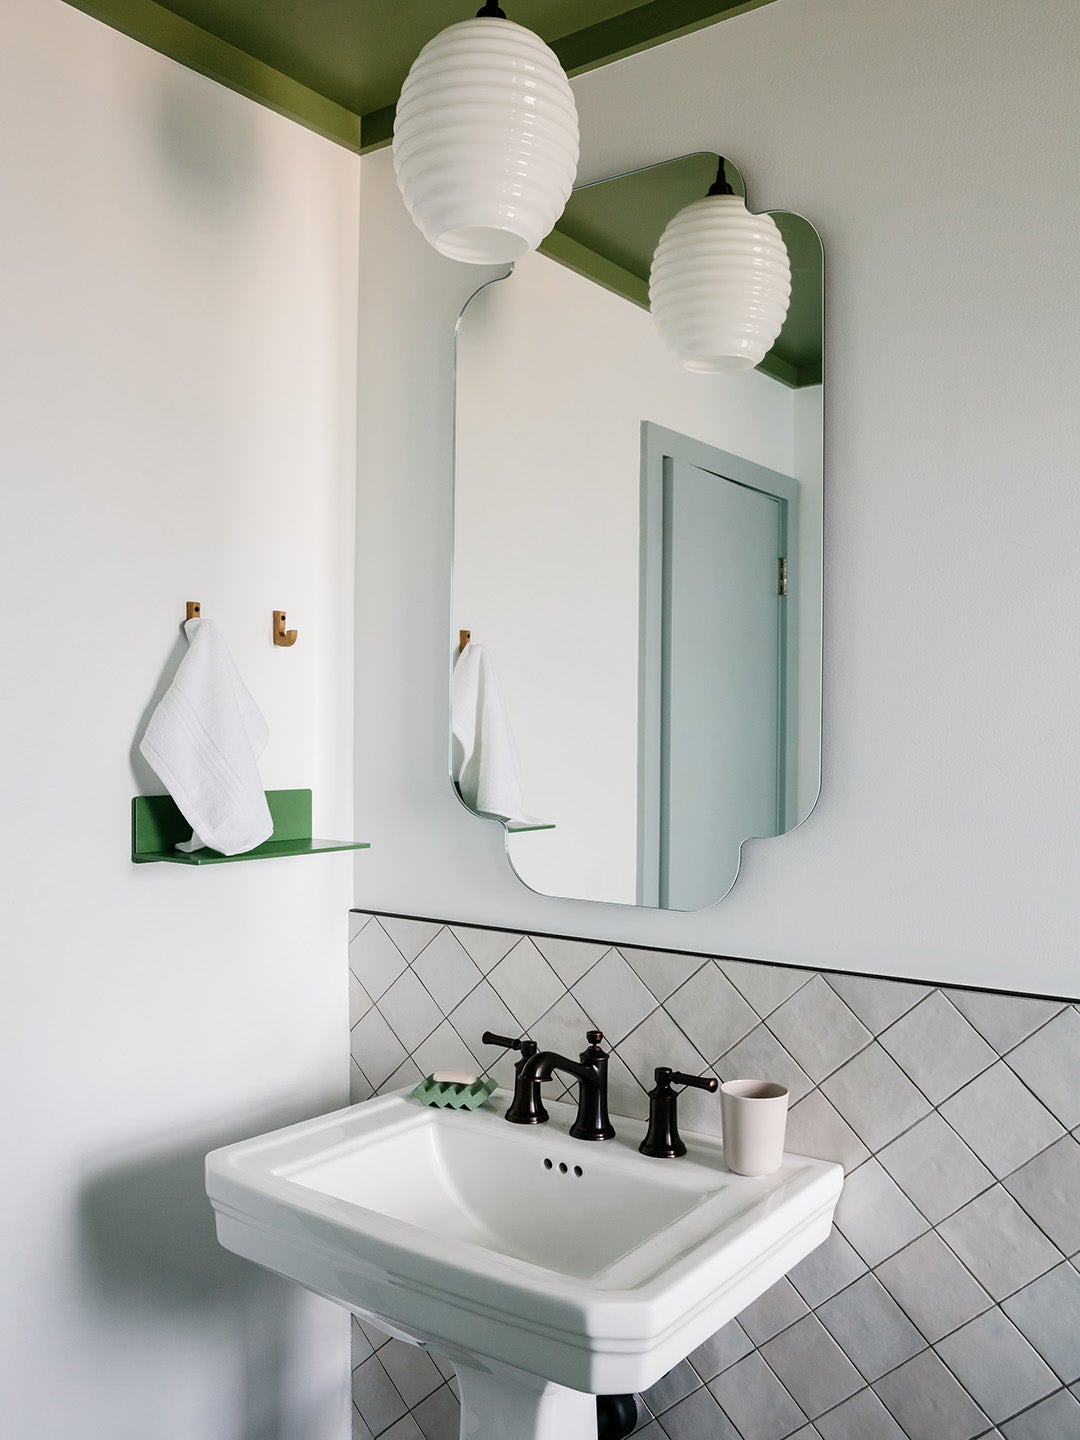 Bright white bathroom with green ceiling